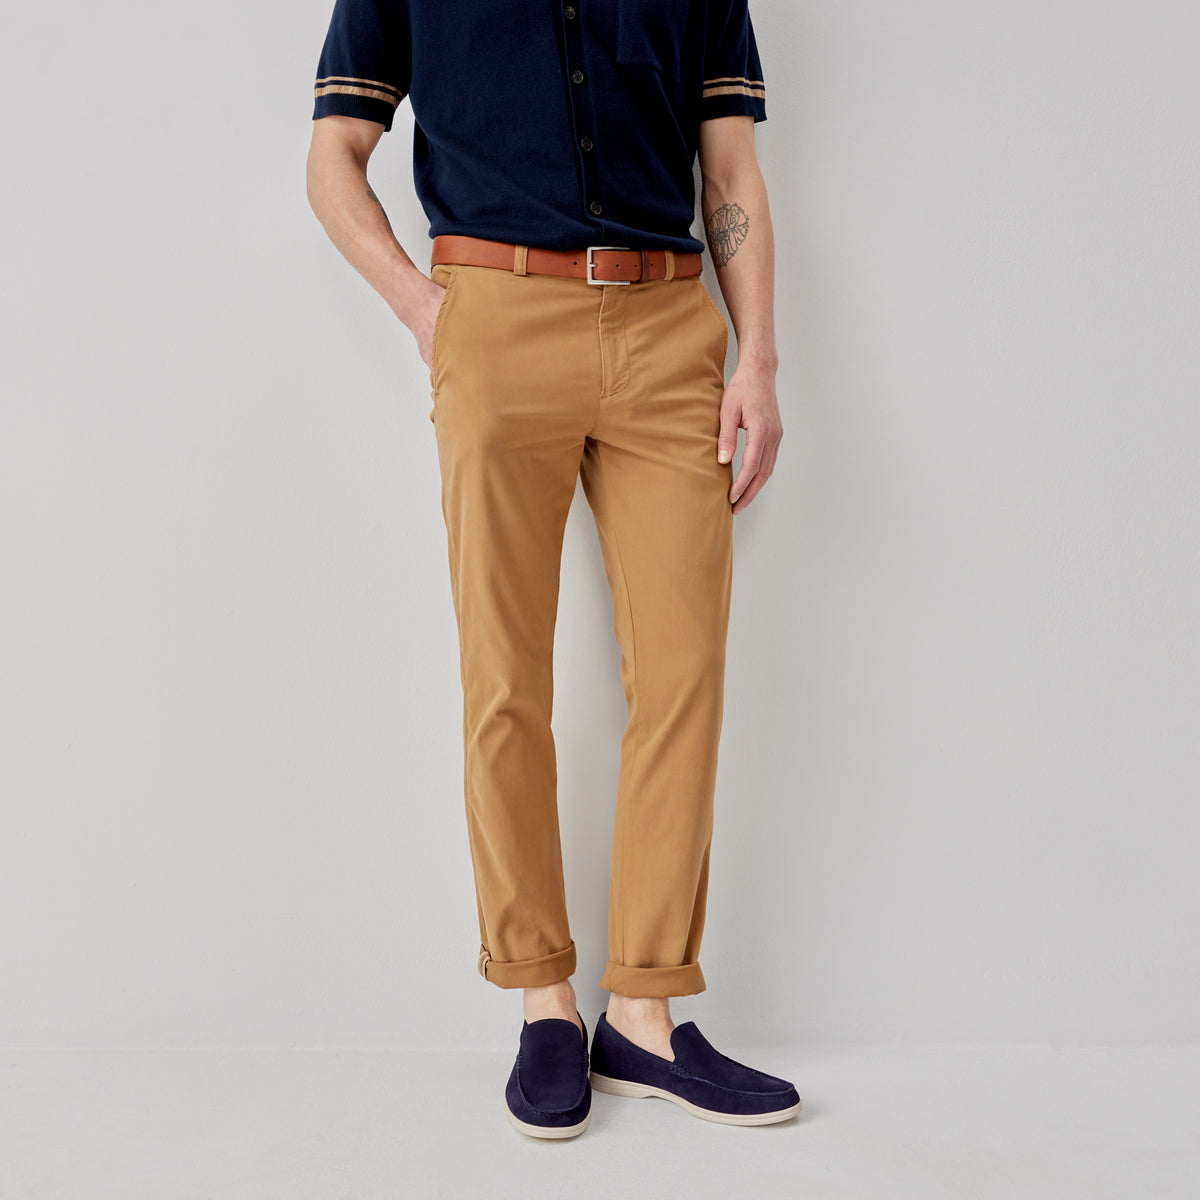 Besterios Tan | Cotton Chinos | Men's Trousers | Oliver Sweeney